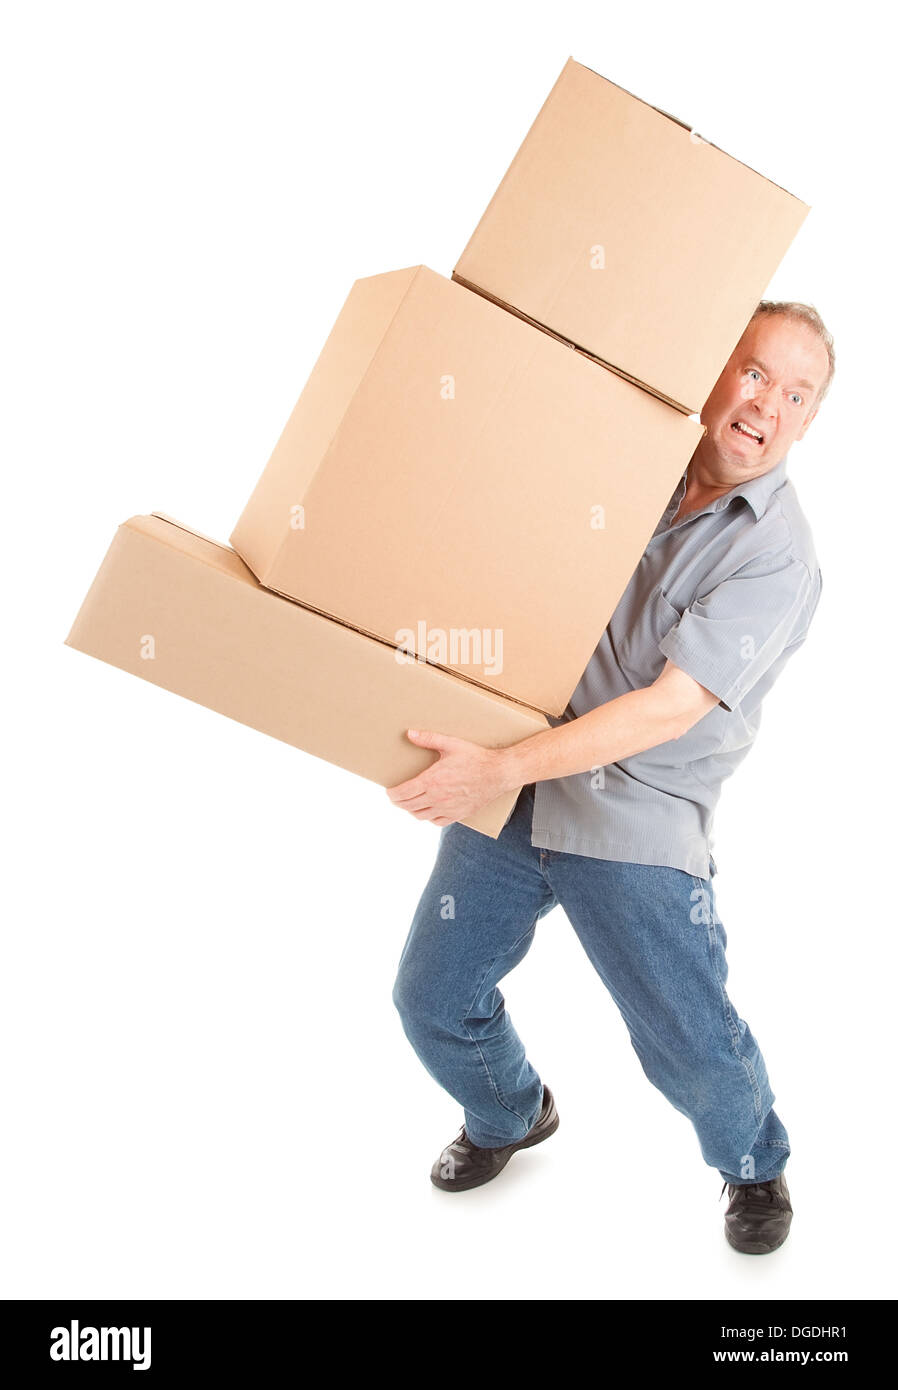 A man is painfully carrying boxes. Stock Photo